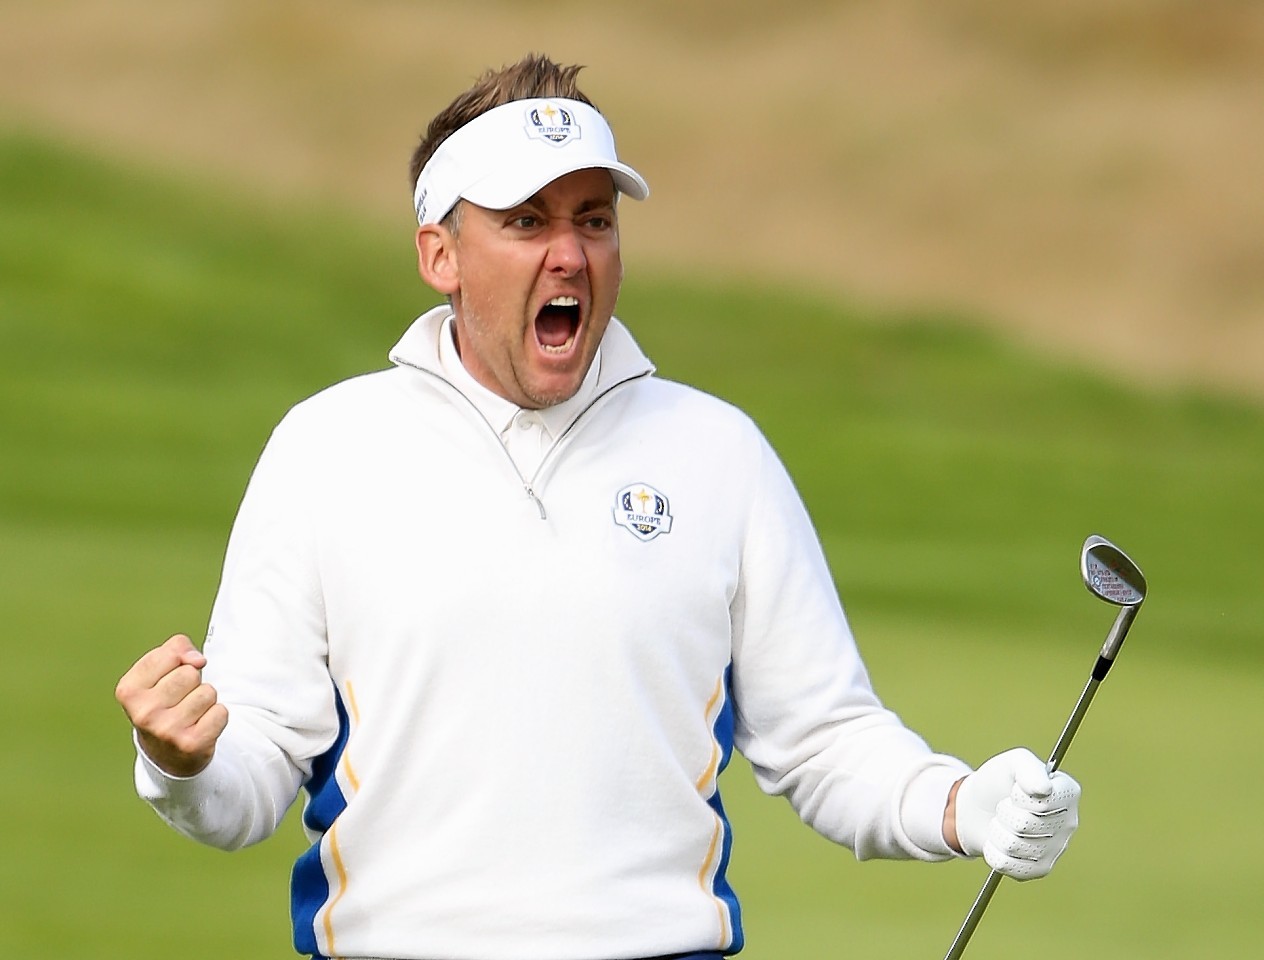 Poulter shows his delight at holing his chip on the 15th this morning